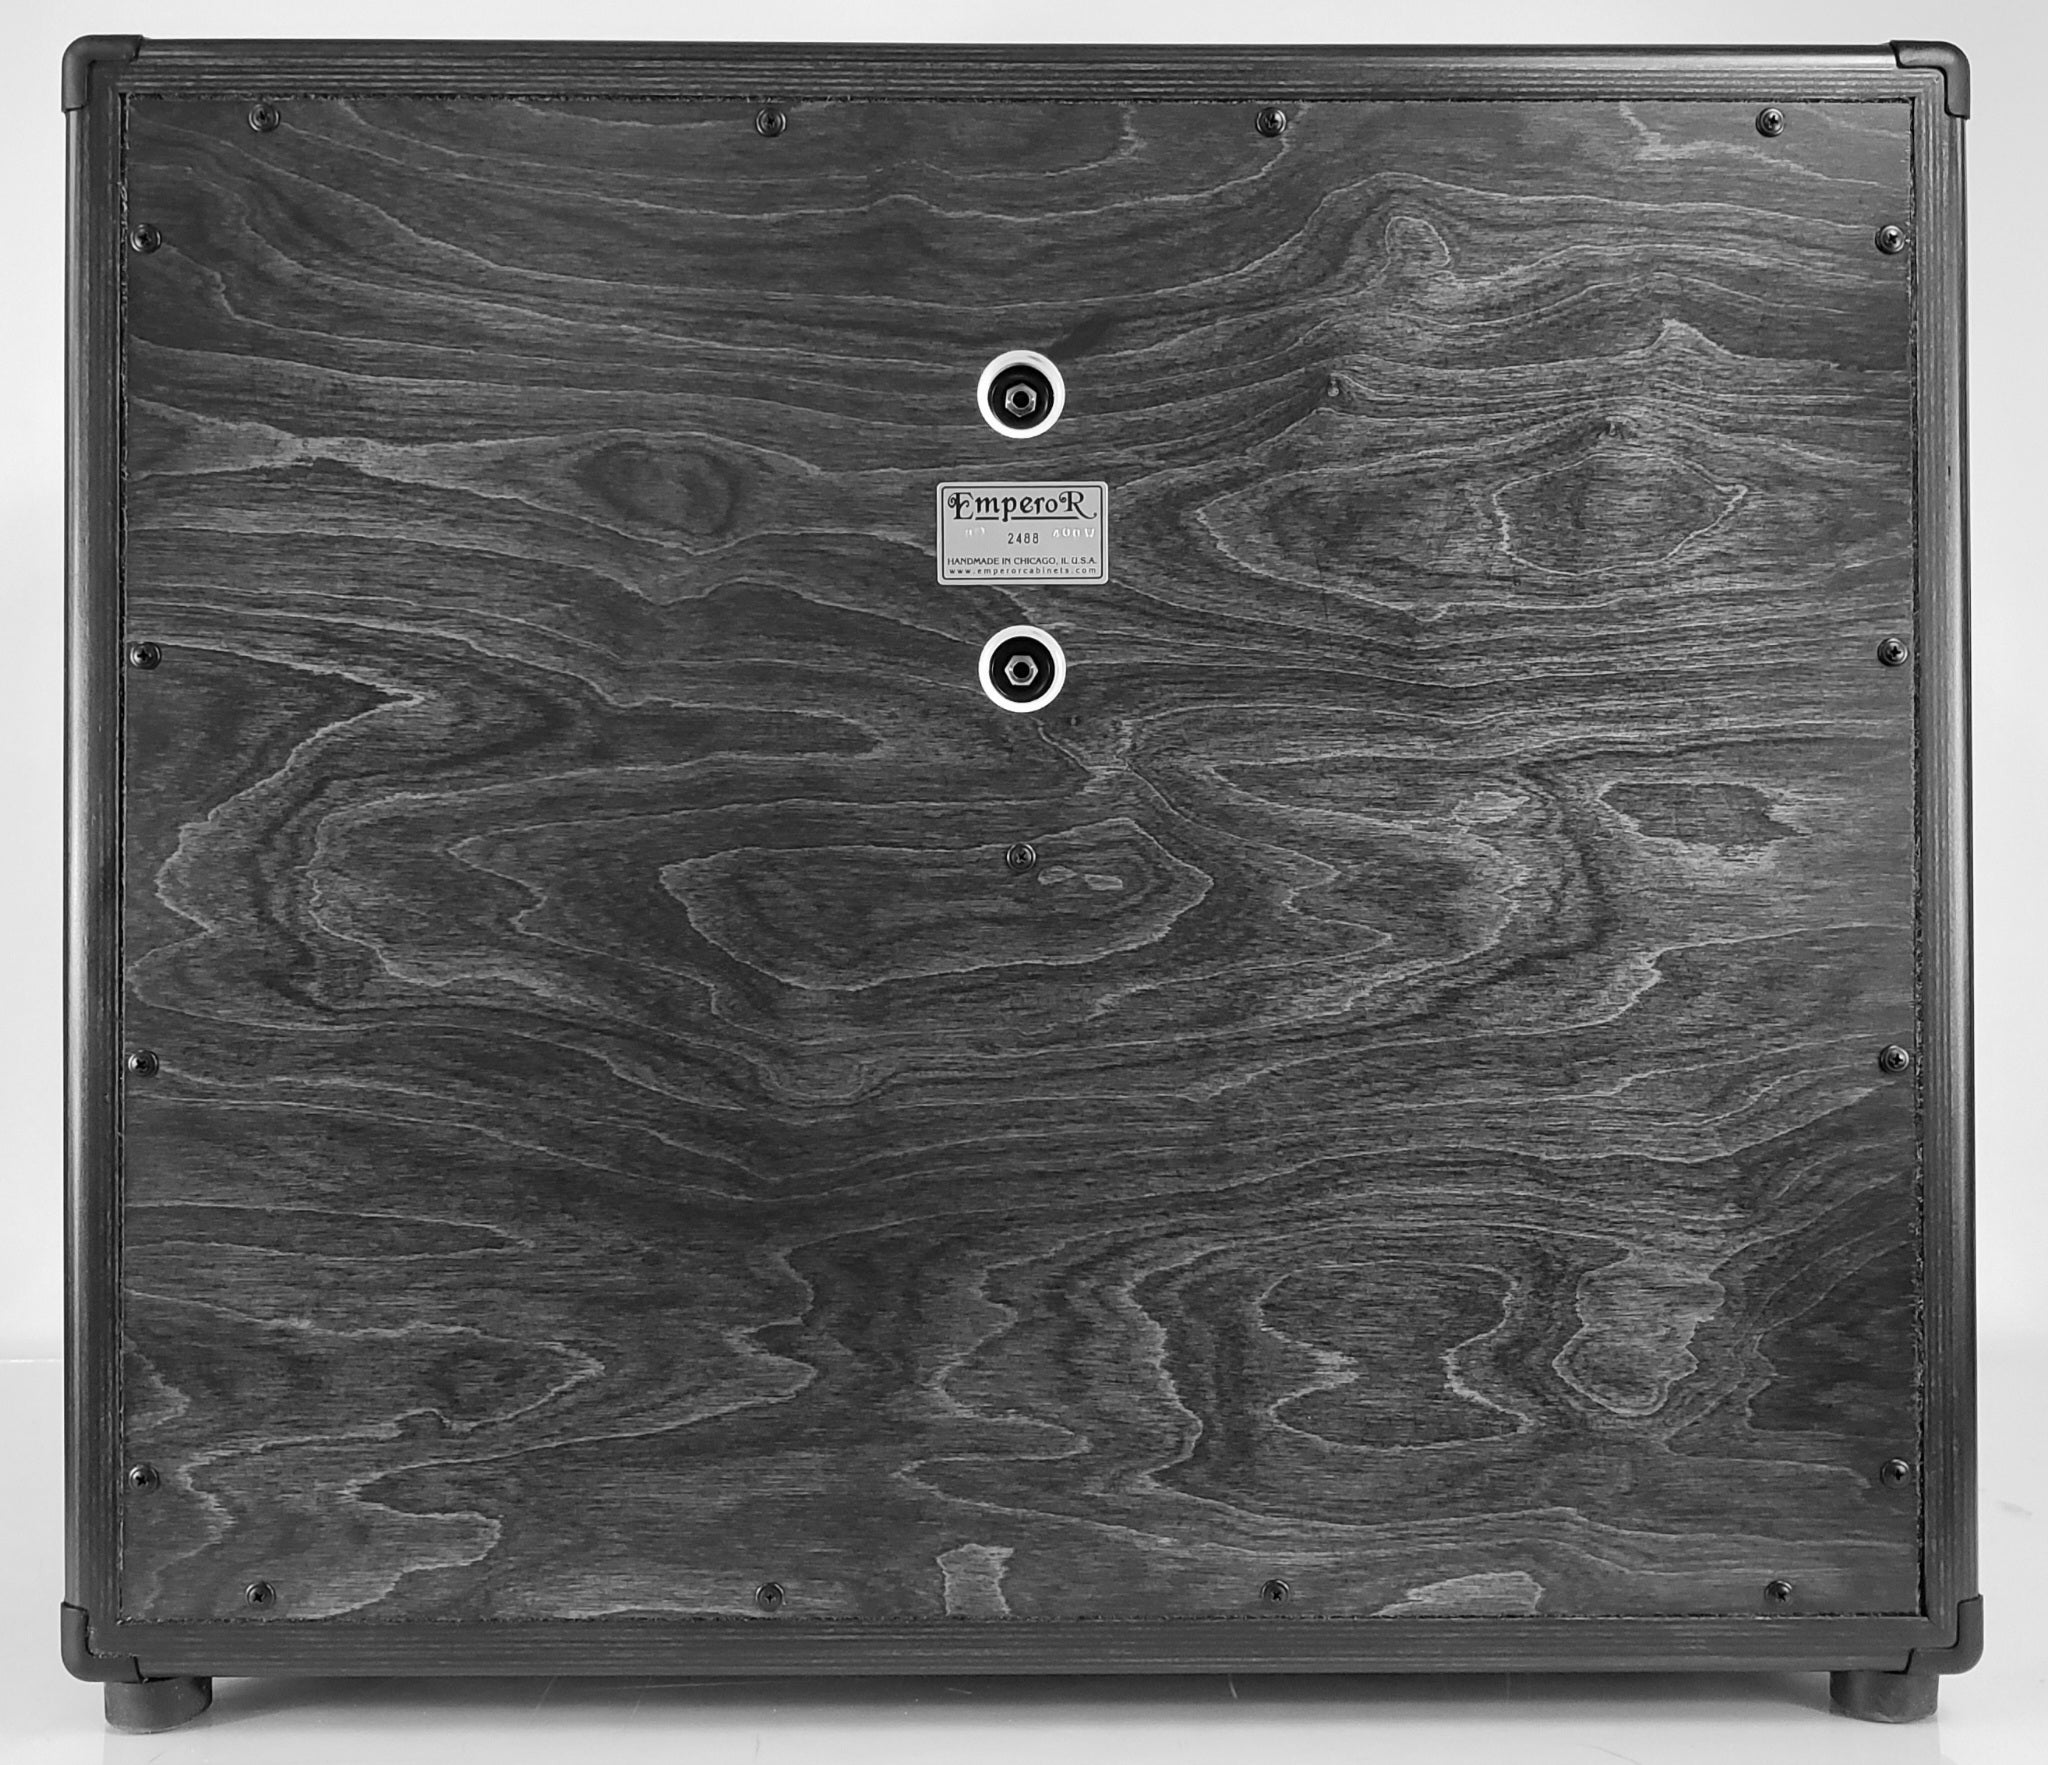 Blackened 2x15 XLT Bass Cabinet - Emperor Cabinets